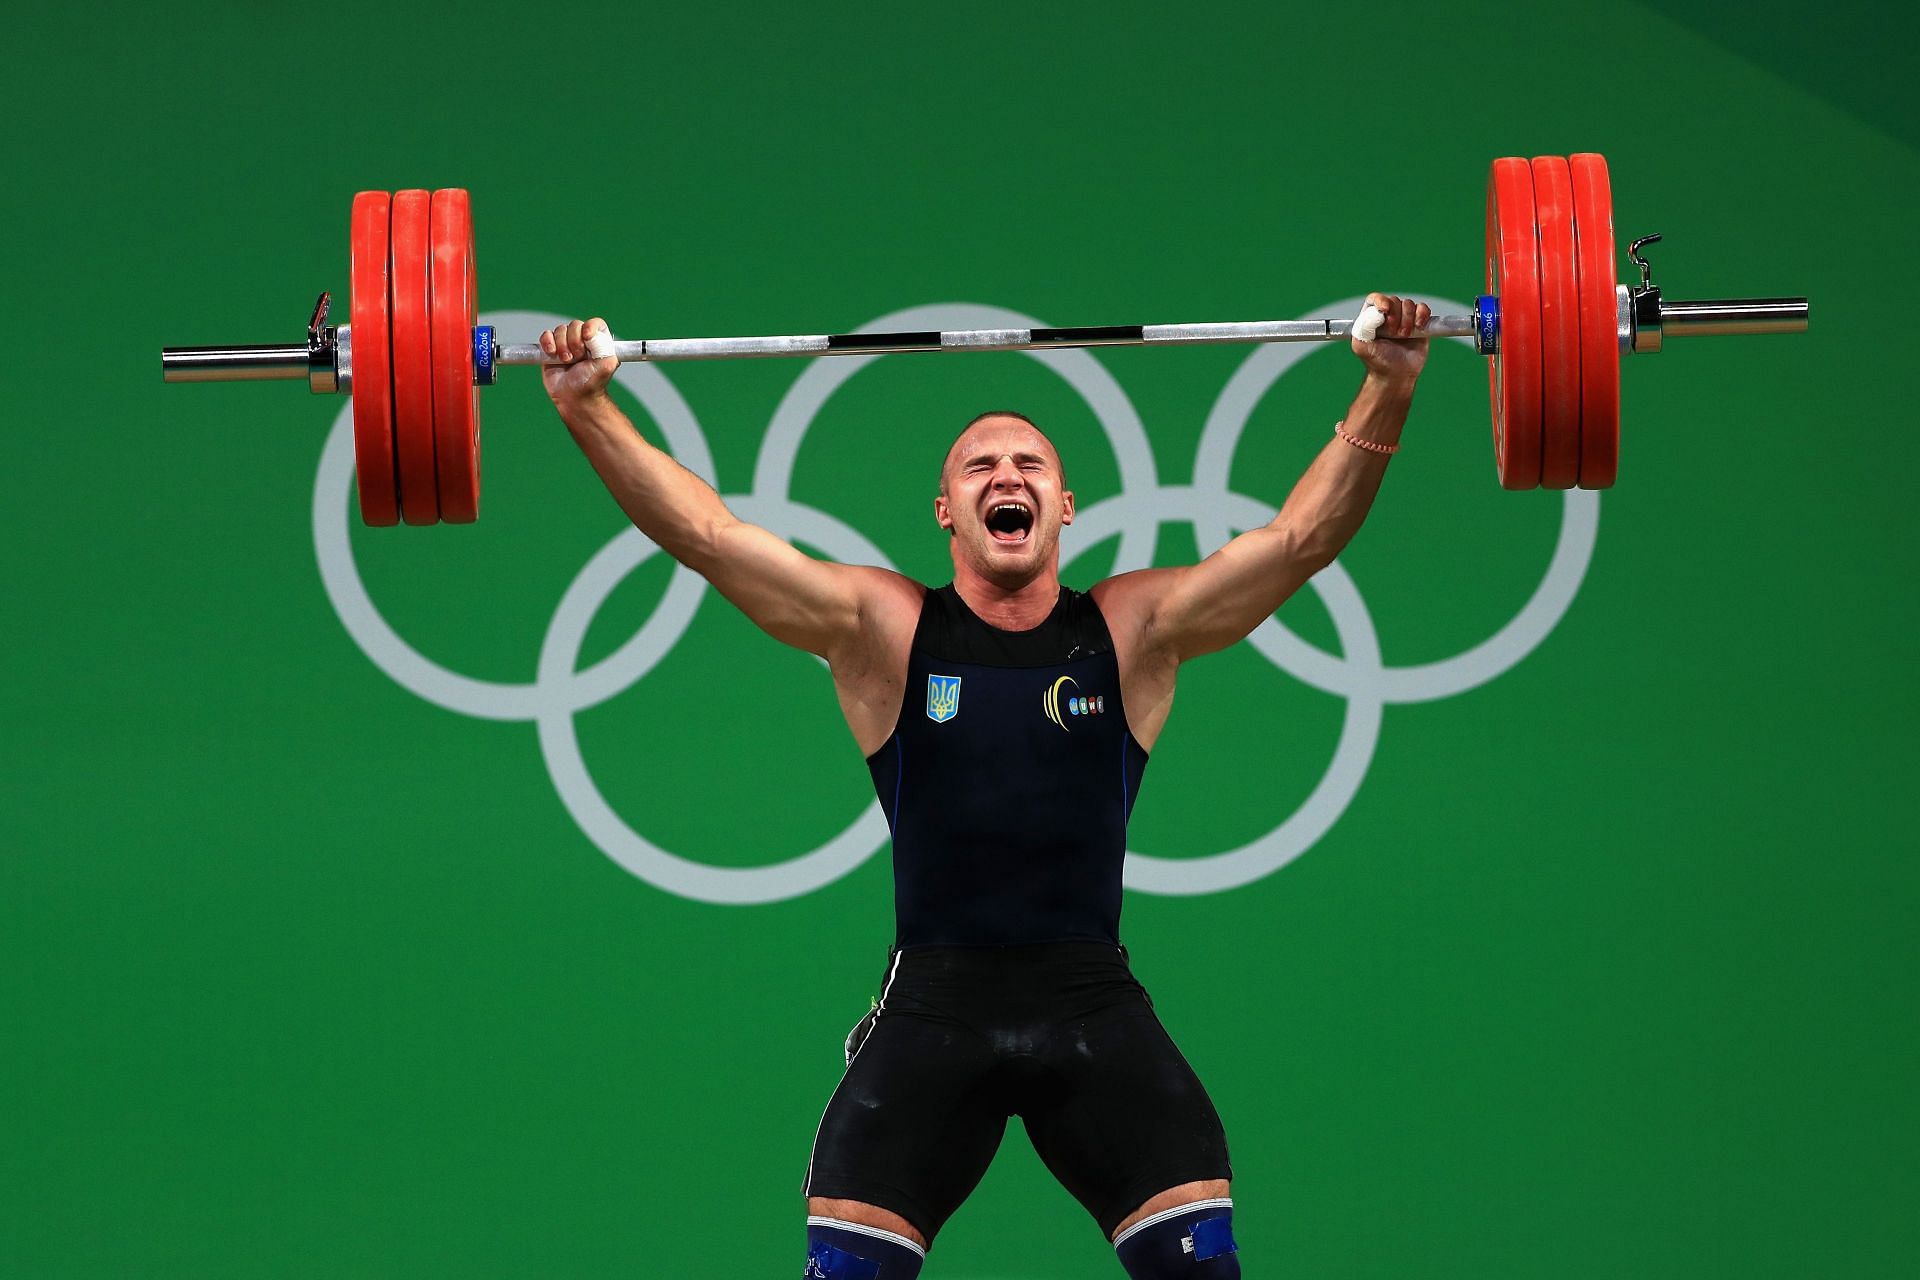 Weightlifting - Olympics: Day 7